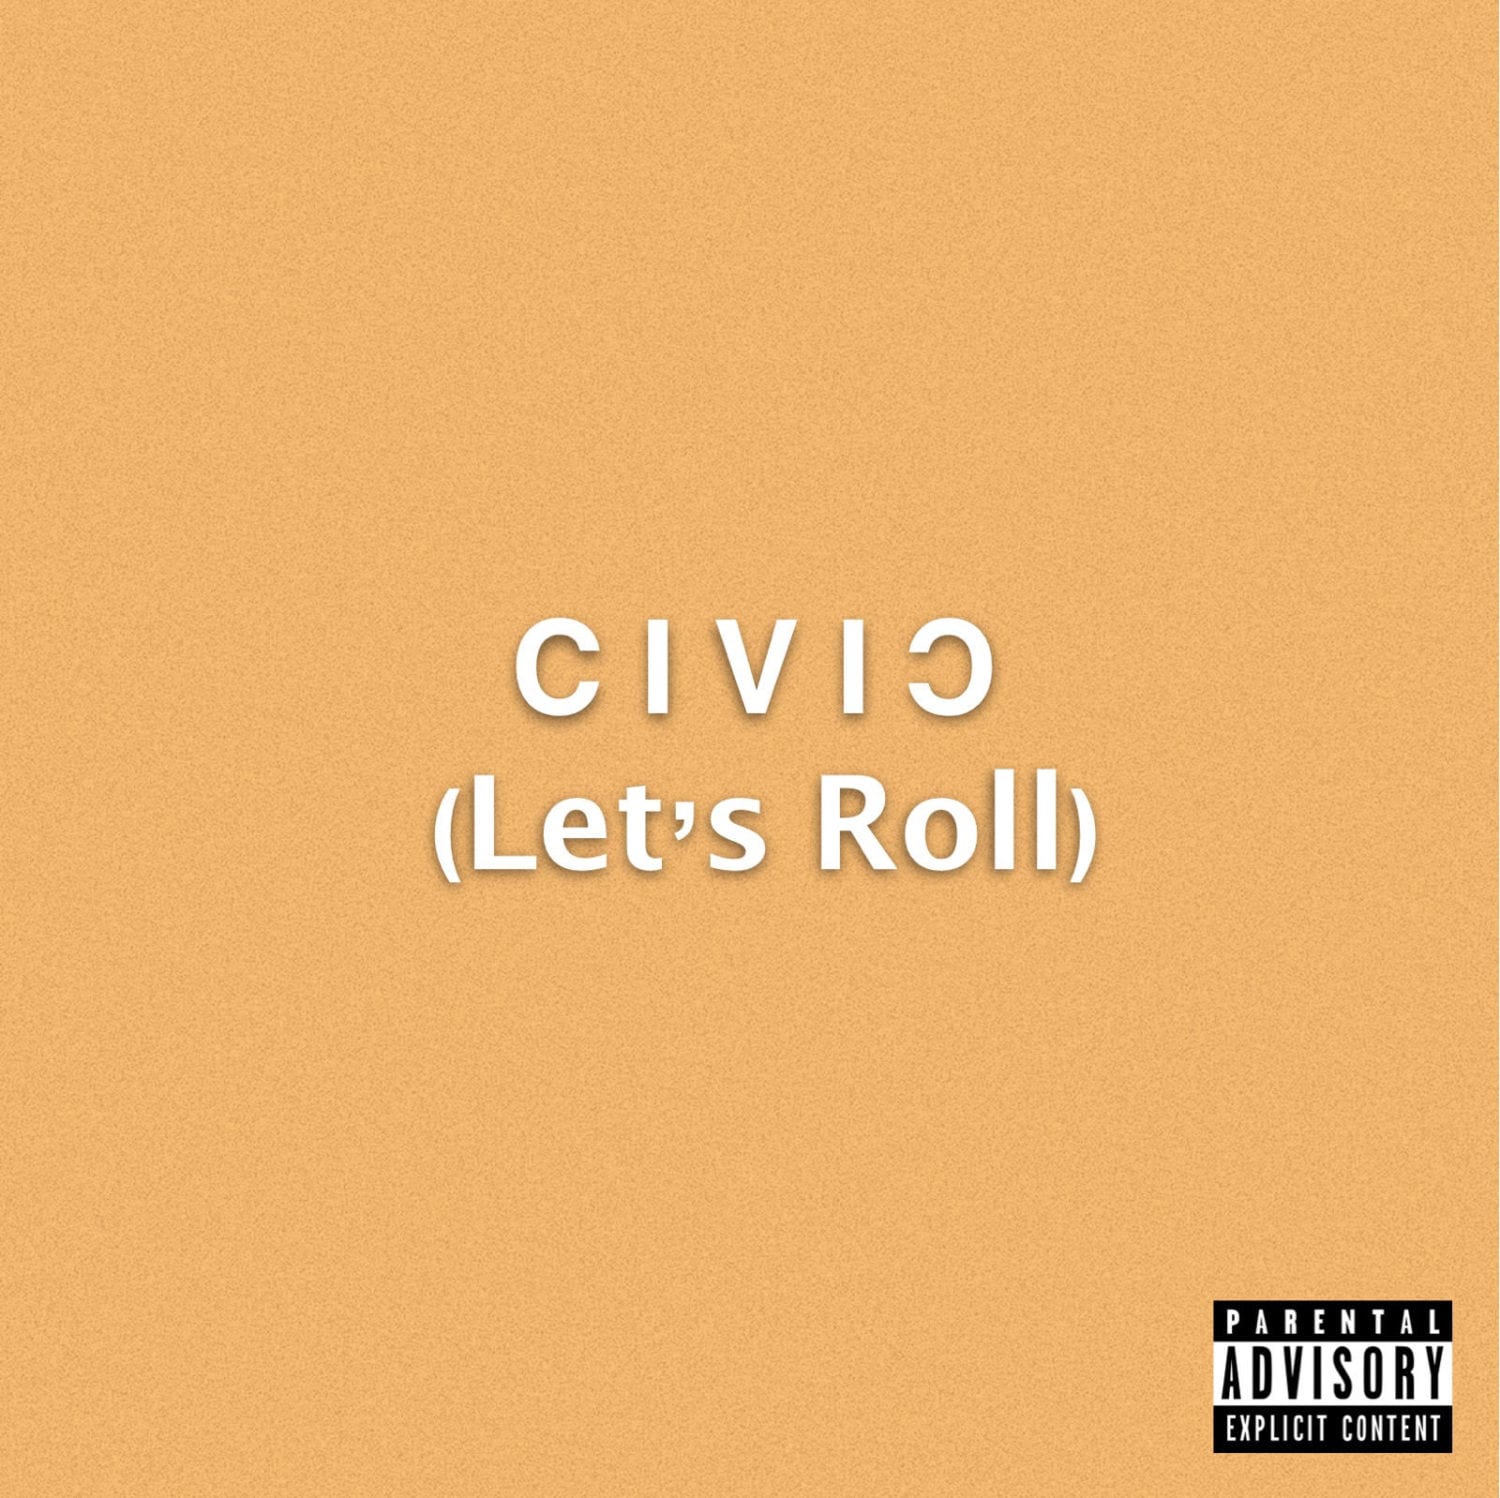 Knoxville, Tennessee Hip Hop Artist Keneff Sparrow Drops New Single - Civic (Let's Roll)